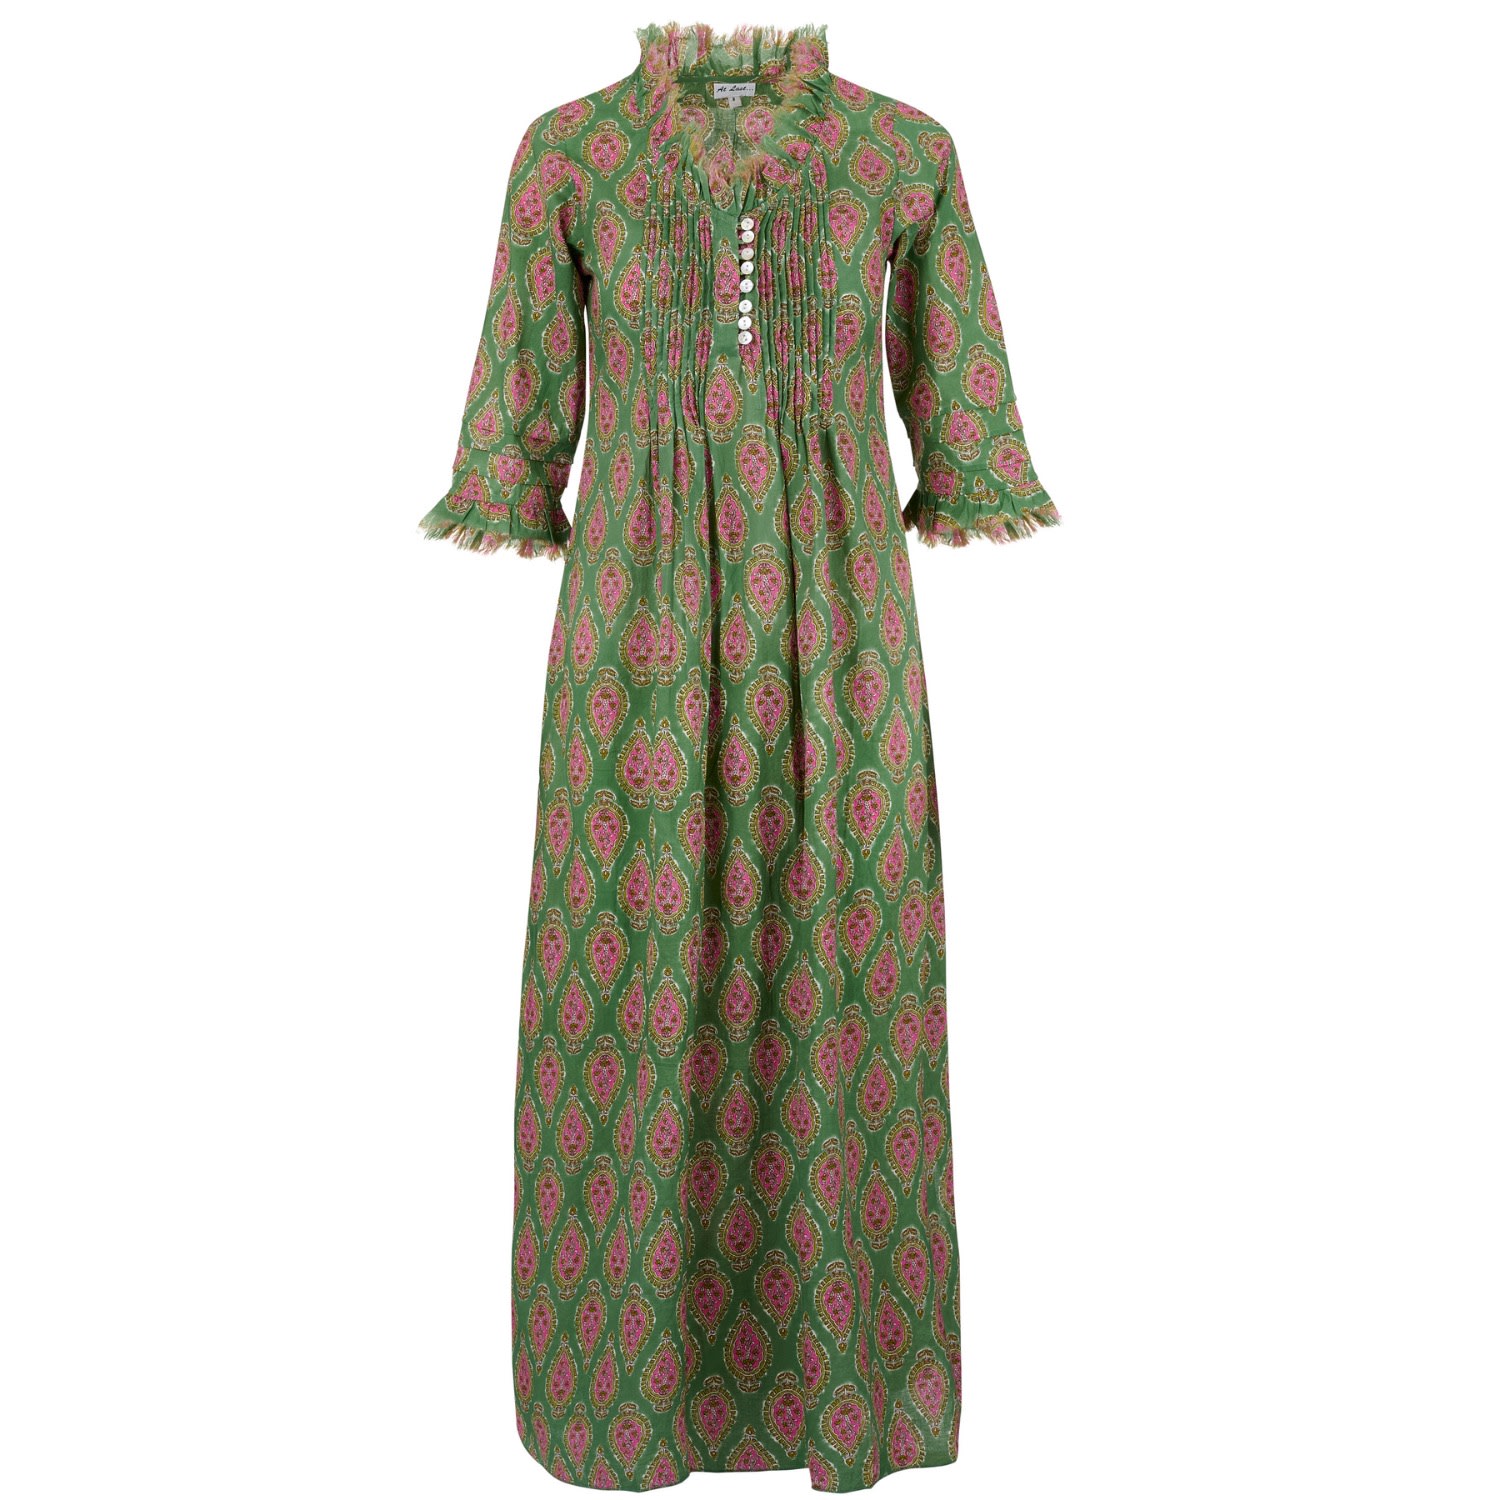 Women's Cotton Annabel Maxi Dress In Olive Green With Pink Teardrop Extra Small At Last...